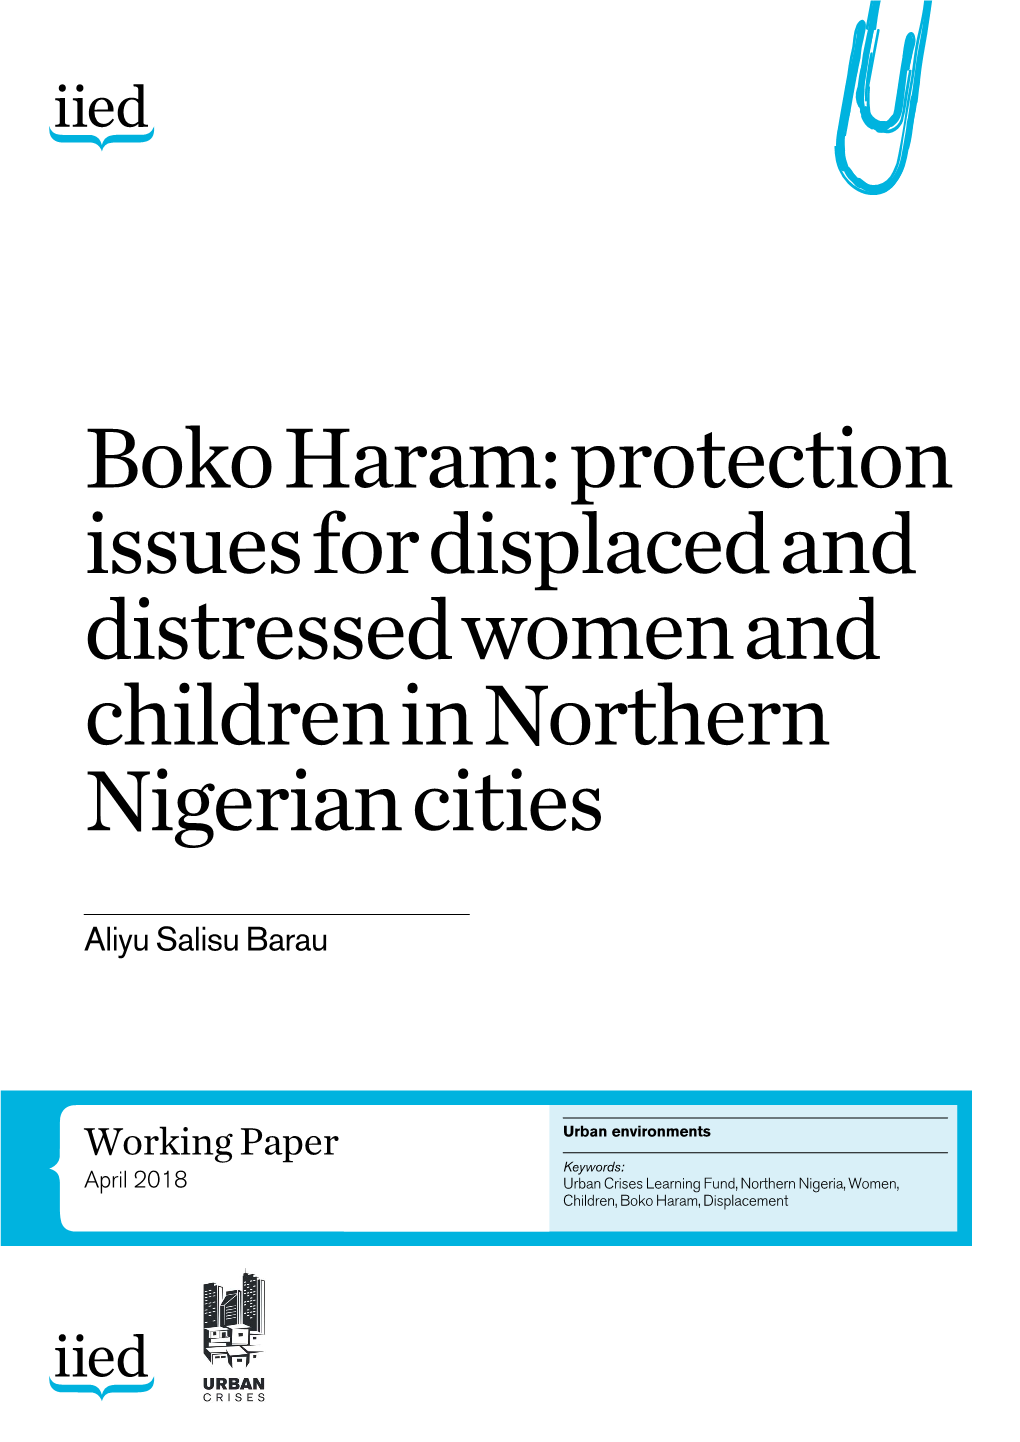 Boko Haram: Protection Issues for Displaced and Distressed Women and Children in Northern Nigerian Cities